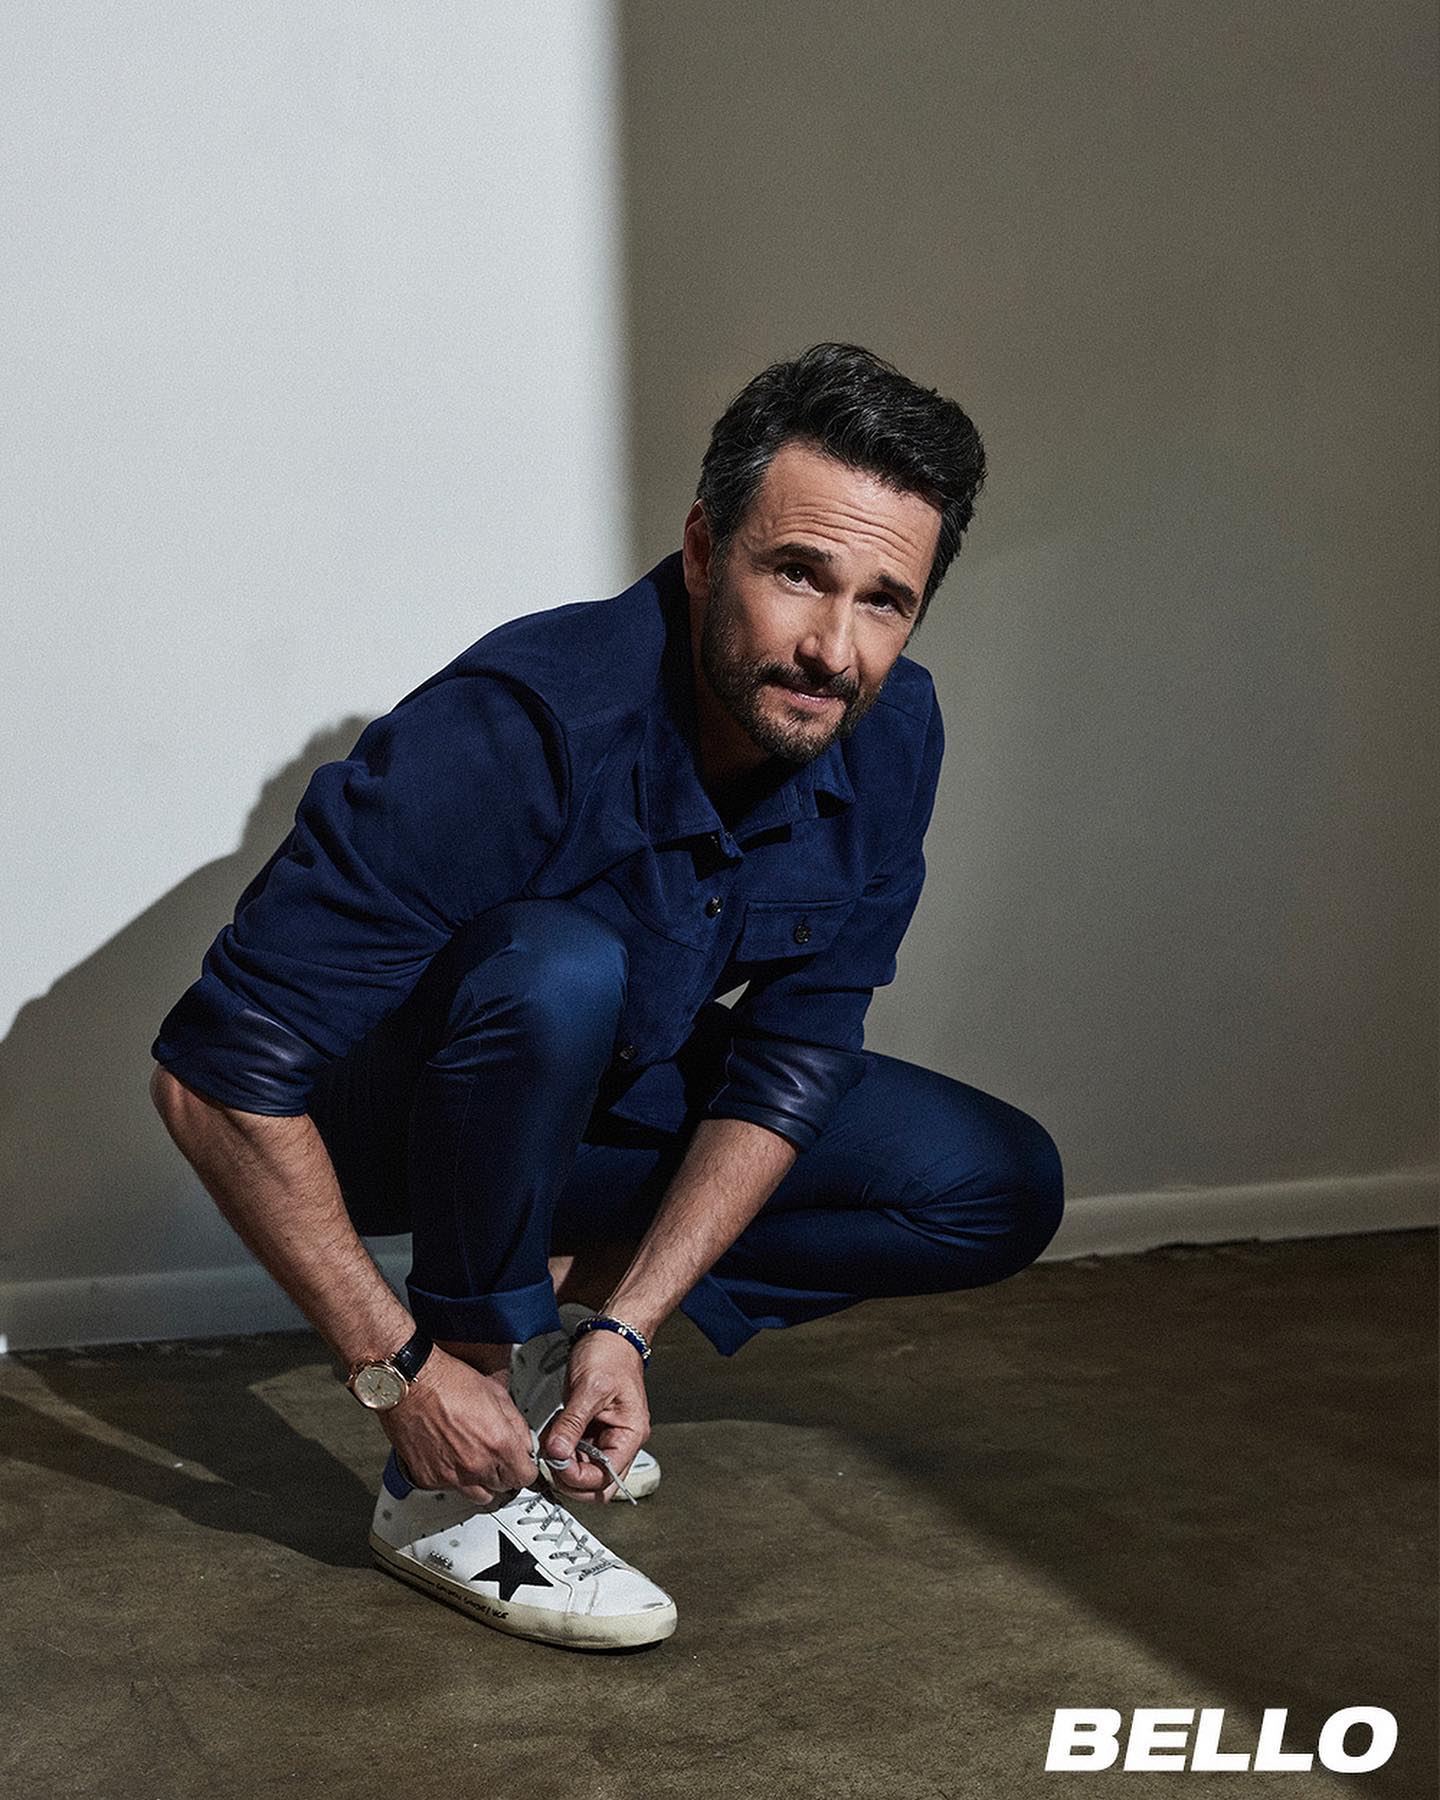 https://d.radikal.host/2023/04/01/Photo-shared-by-Rodrigo-Santoro-on-February-28-2023-tagging-goldengoose.-May-be-an-image-of-1-person-beard-footwear-wrist-watch-indoor-and-text-that-says-BELLO..jpg